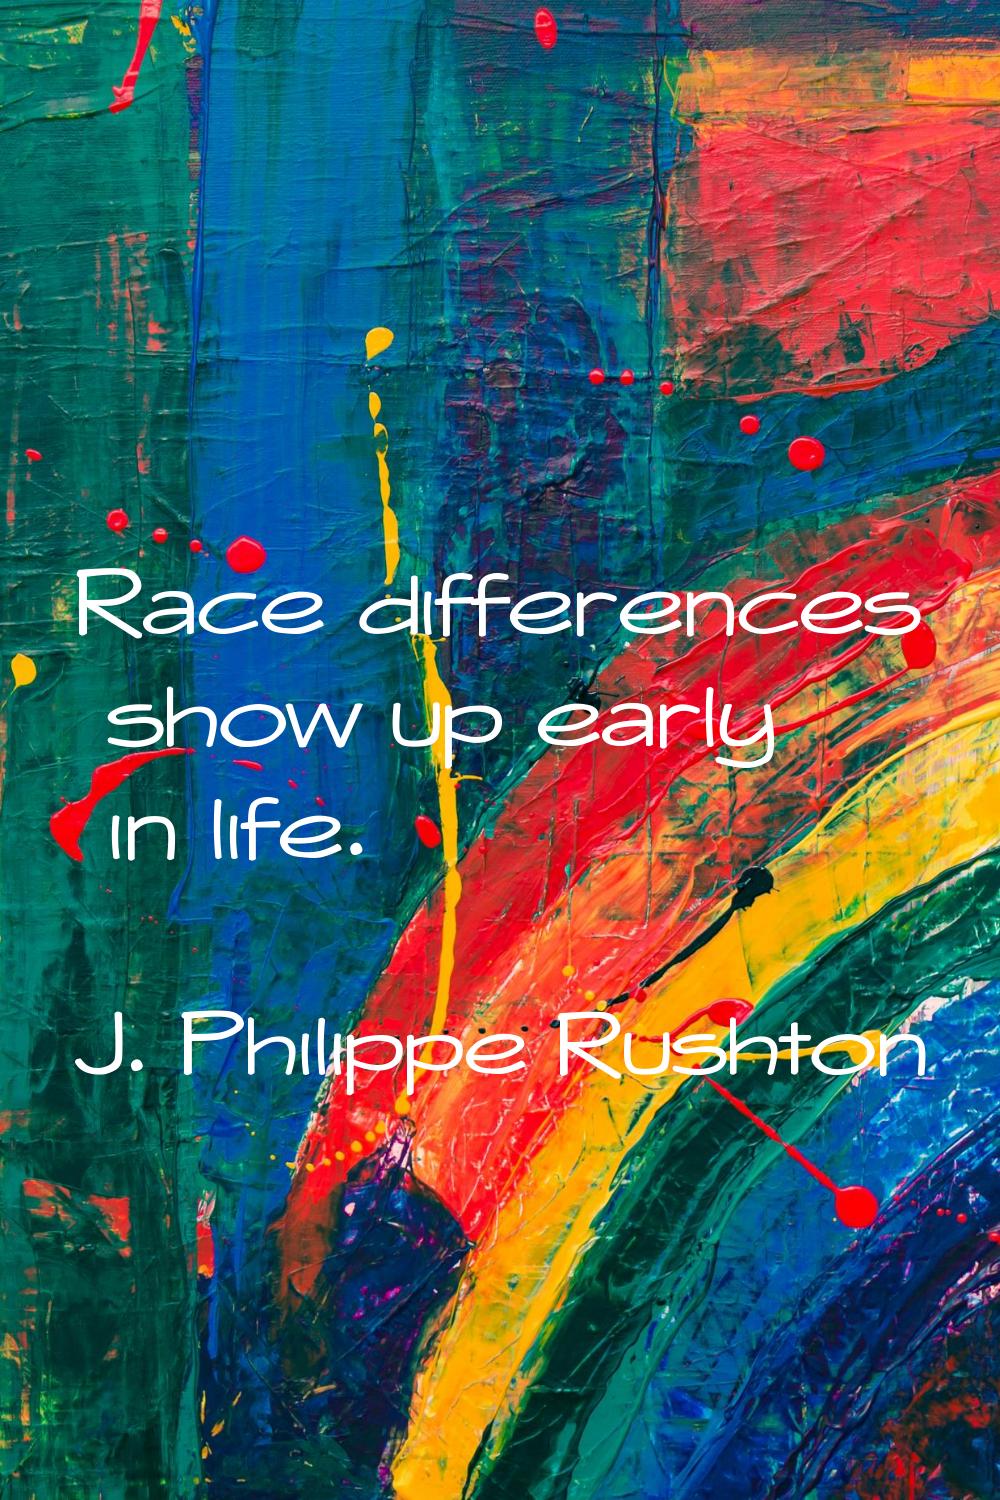 Race differences show up early in life.